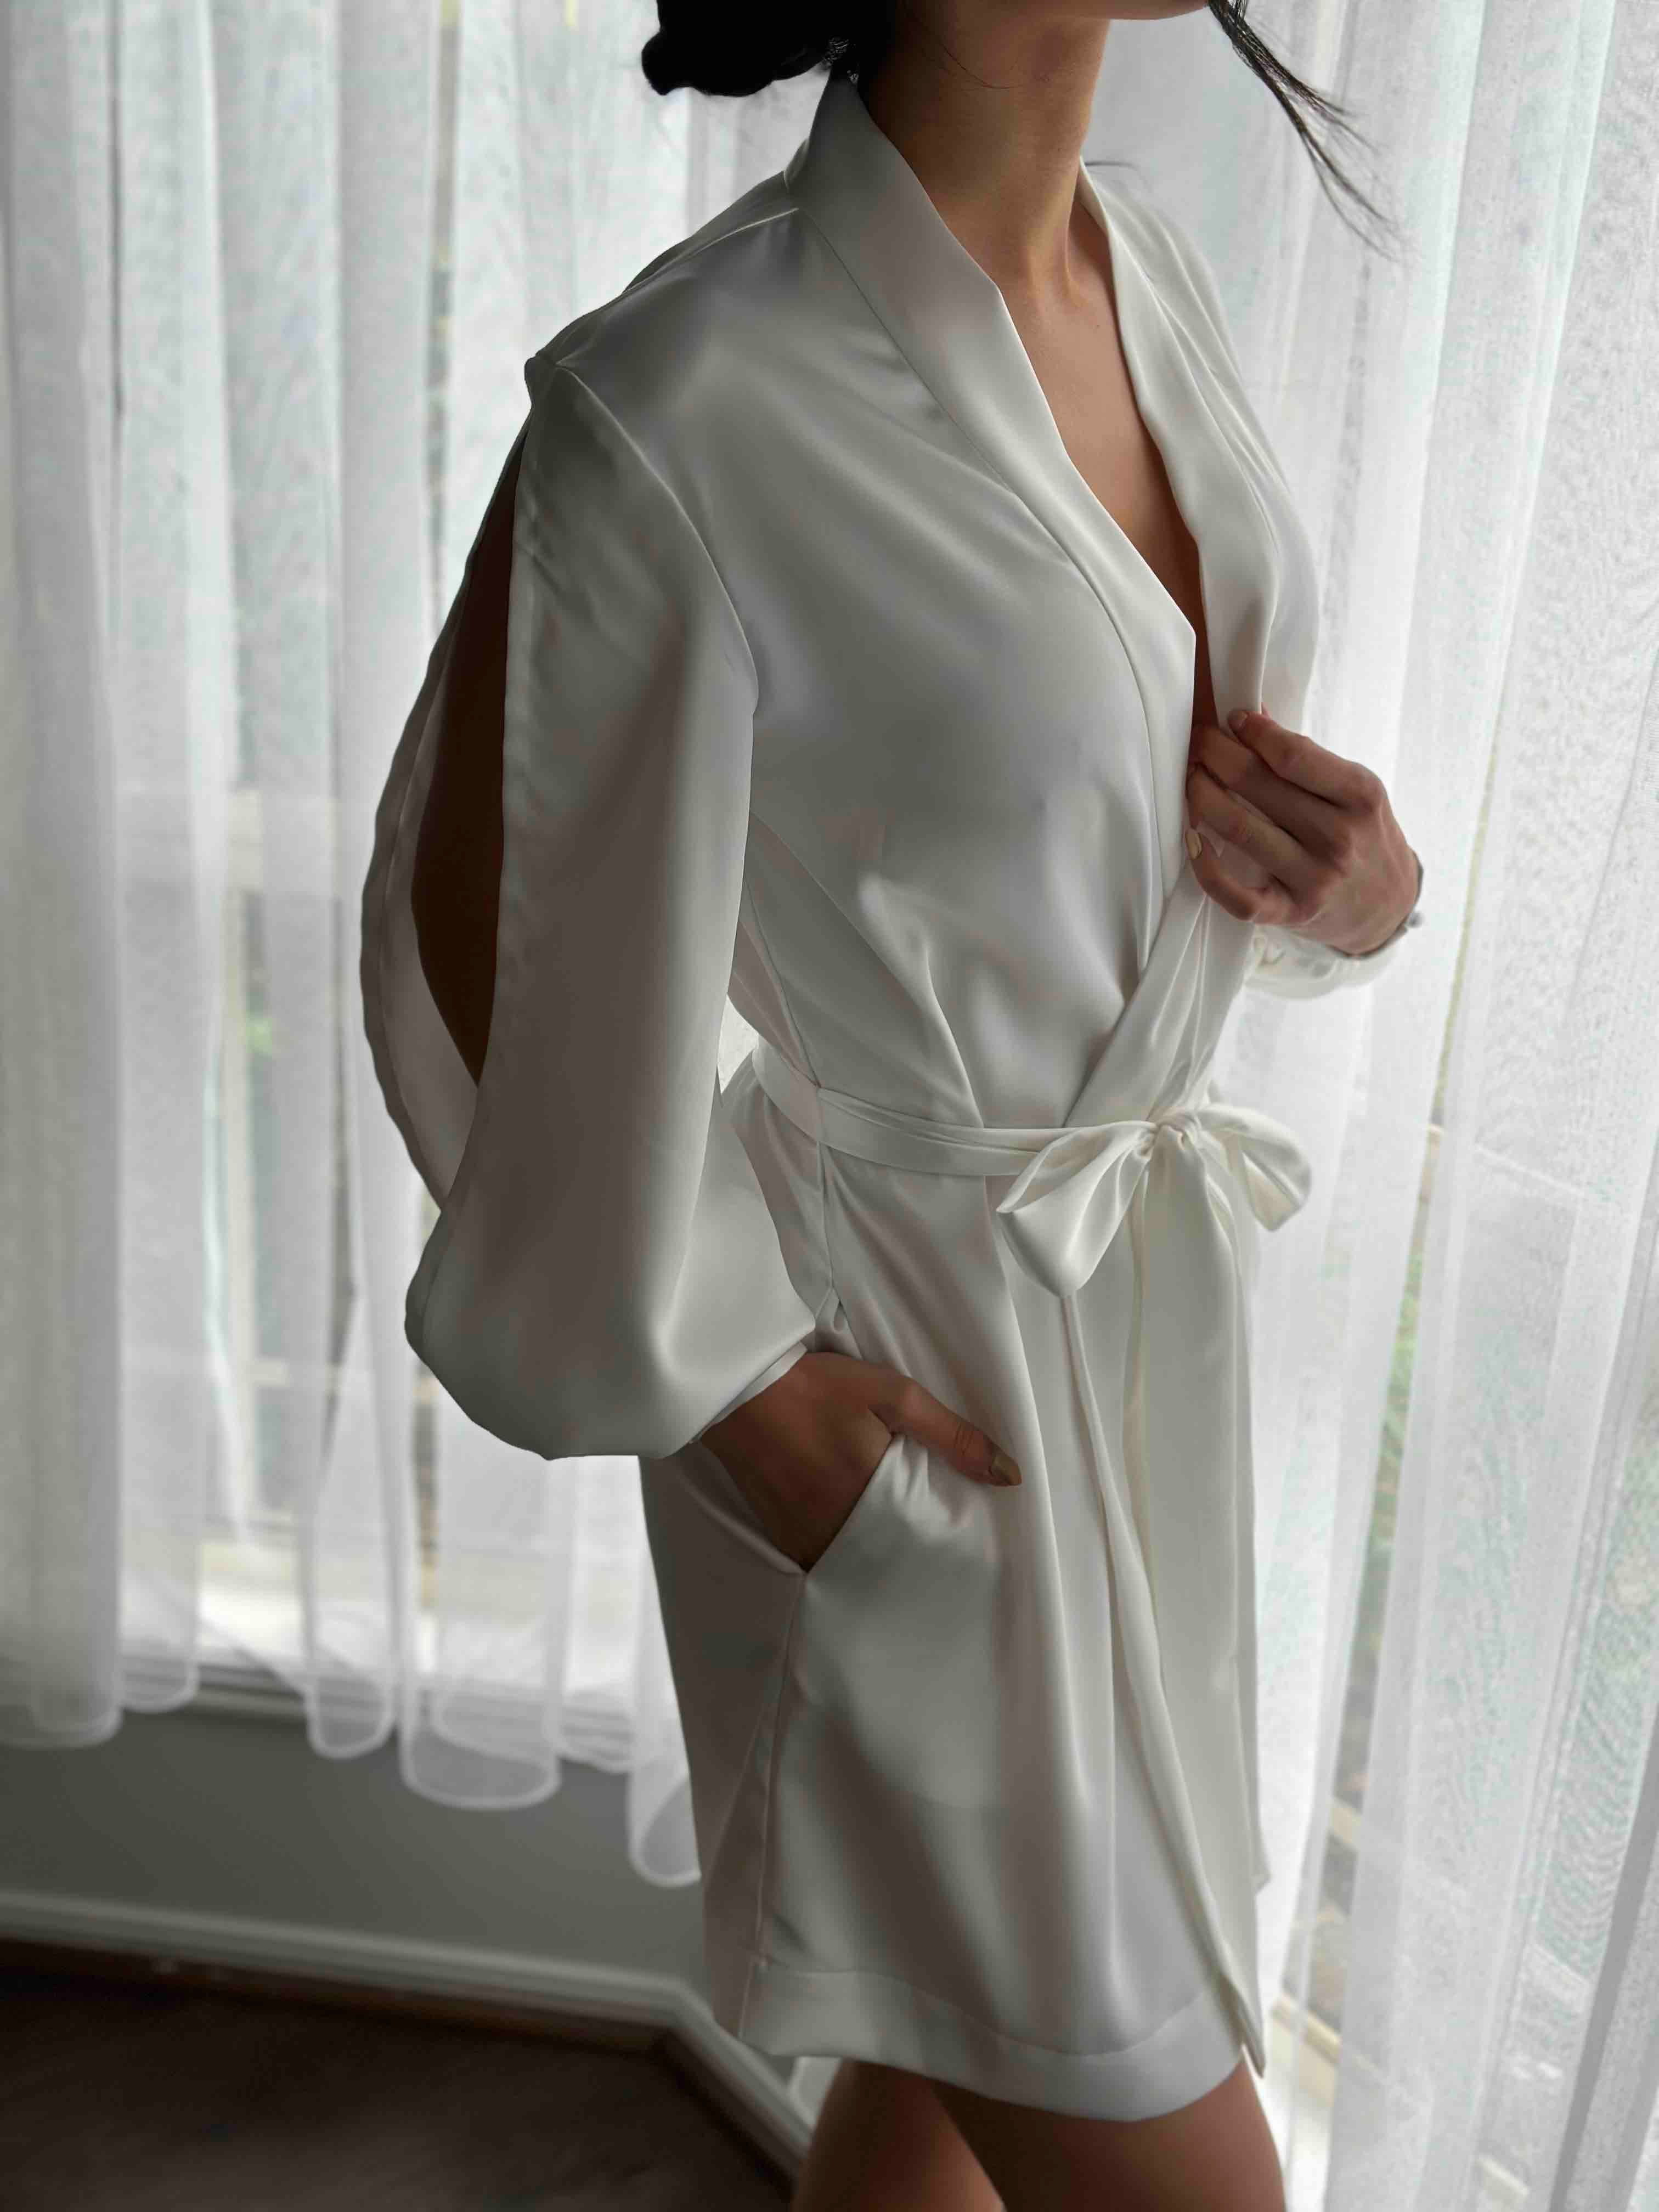 bridal robe at knee length with arm splits